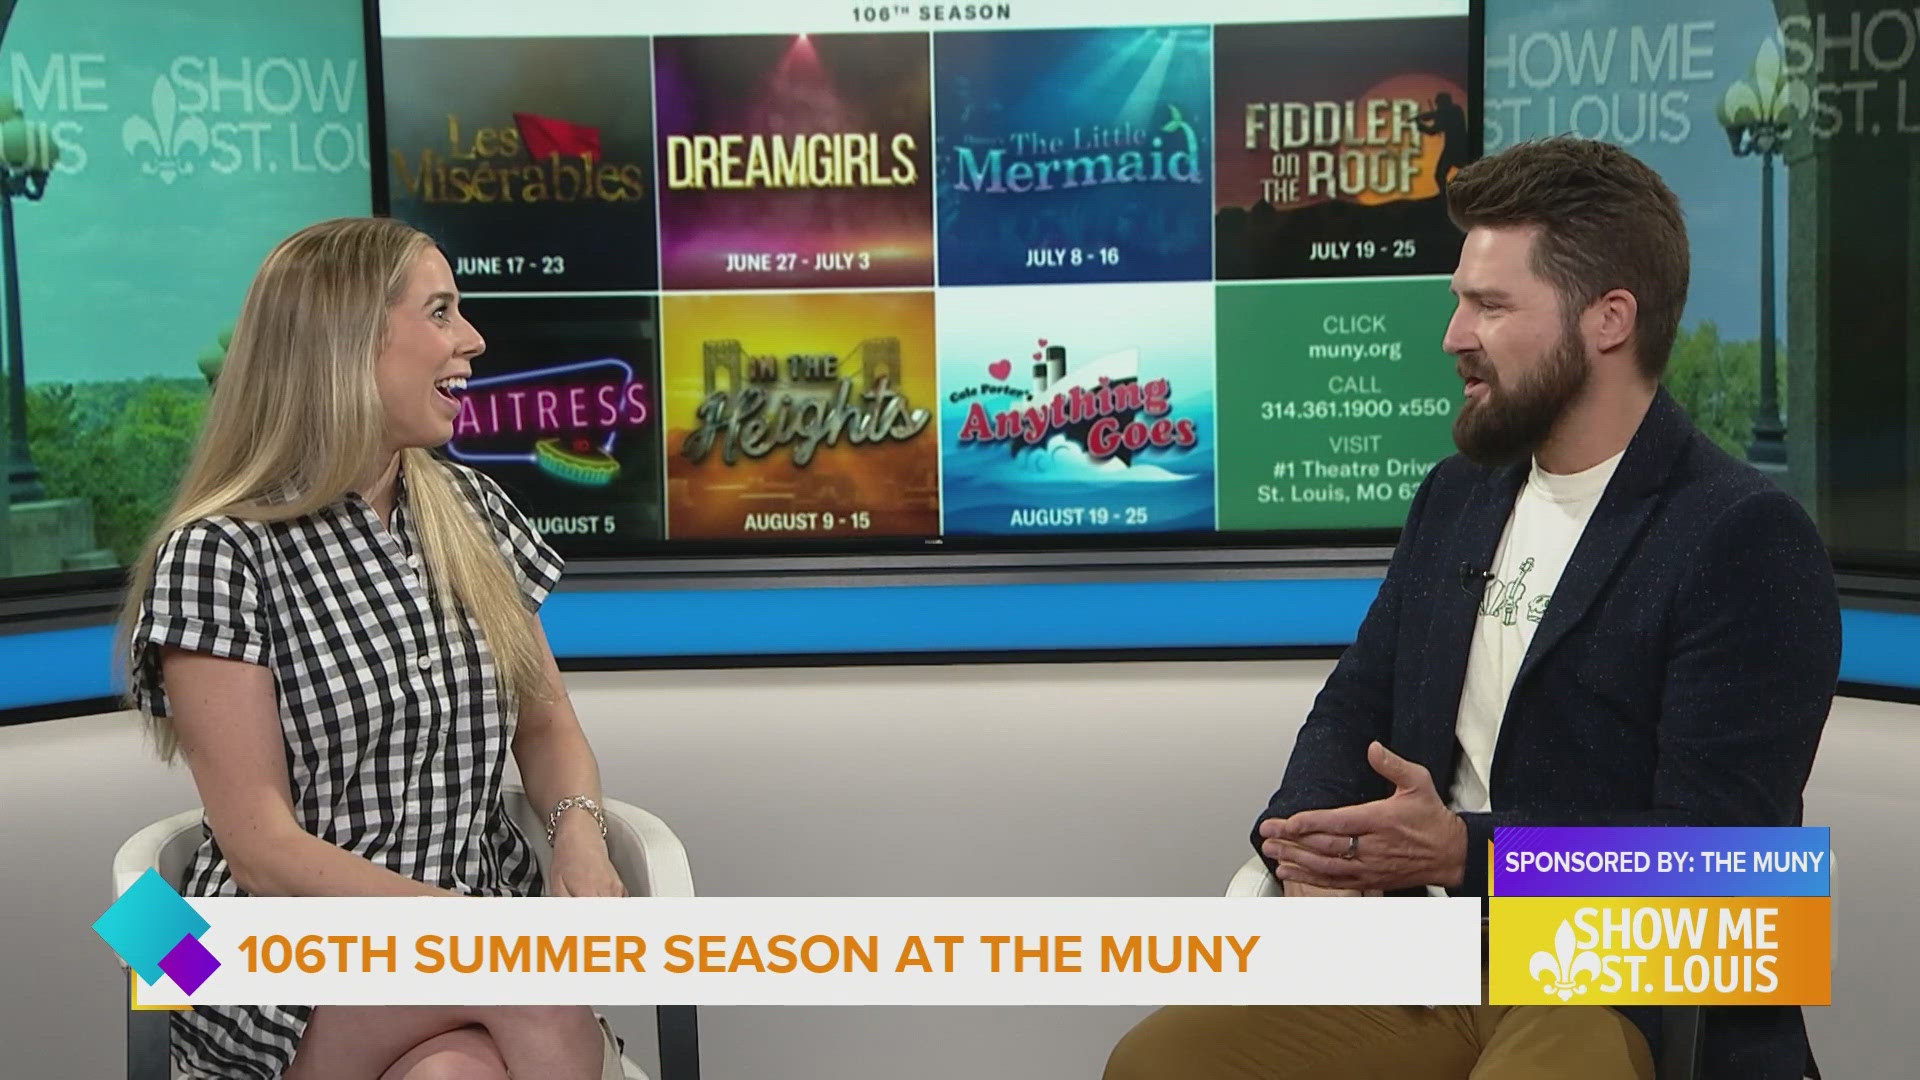 See the spectacular show lineup for the 106th season at The Muny.